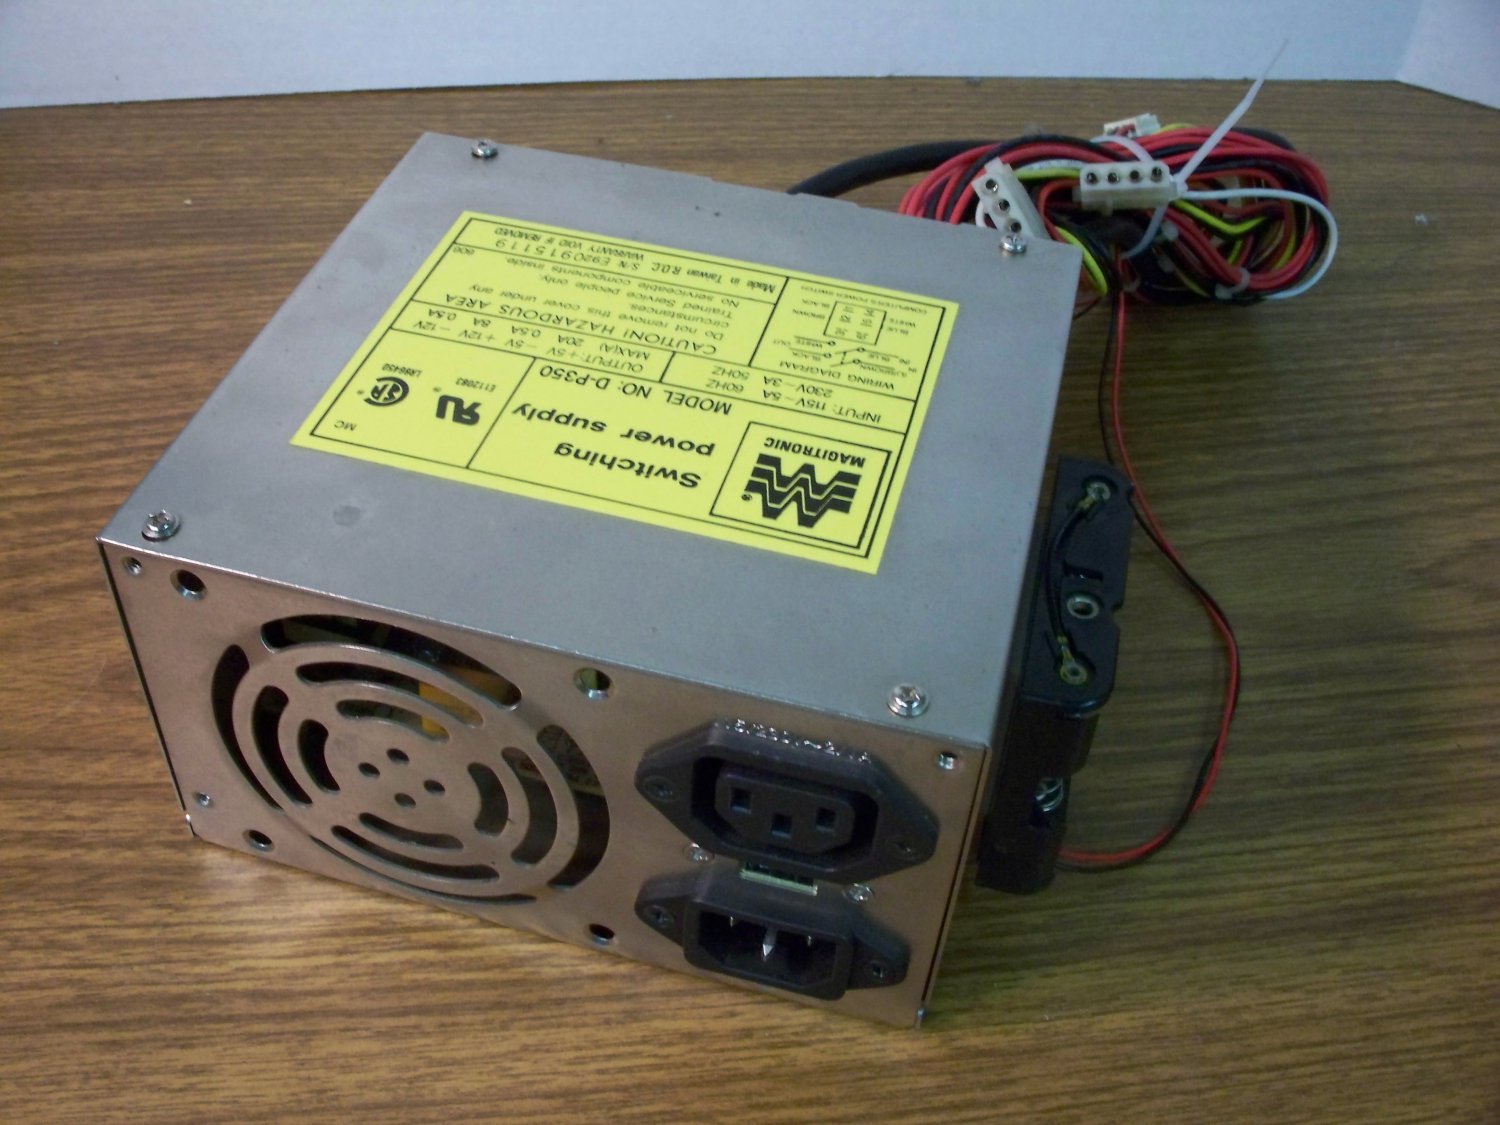 Details about   D-P350 Magitronic AT Power Supply 200W TESTED AS GOOD,WITH .25IN DISCONNECTS 